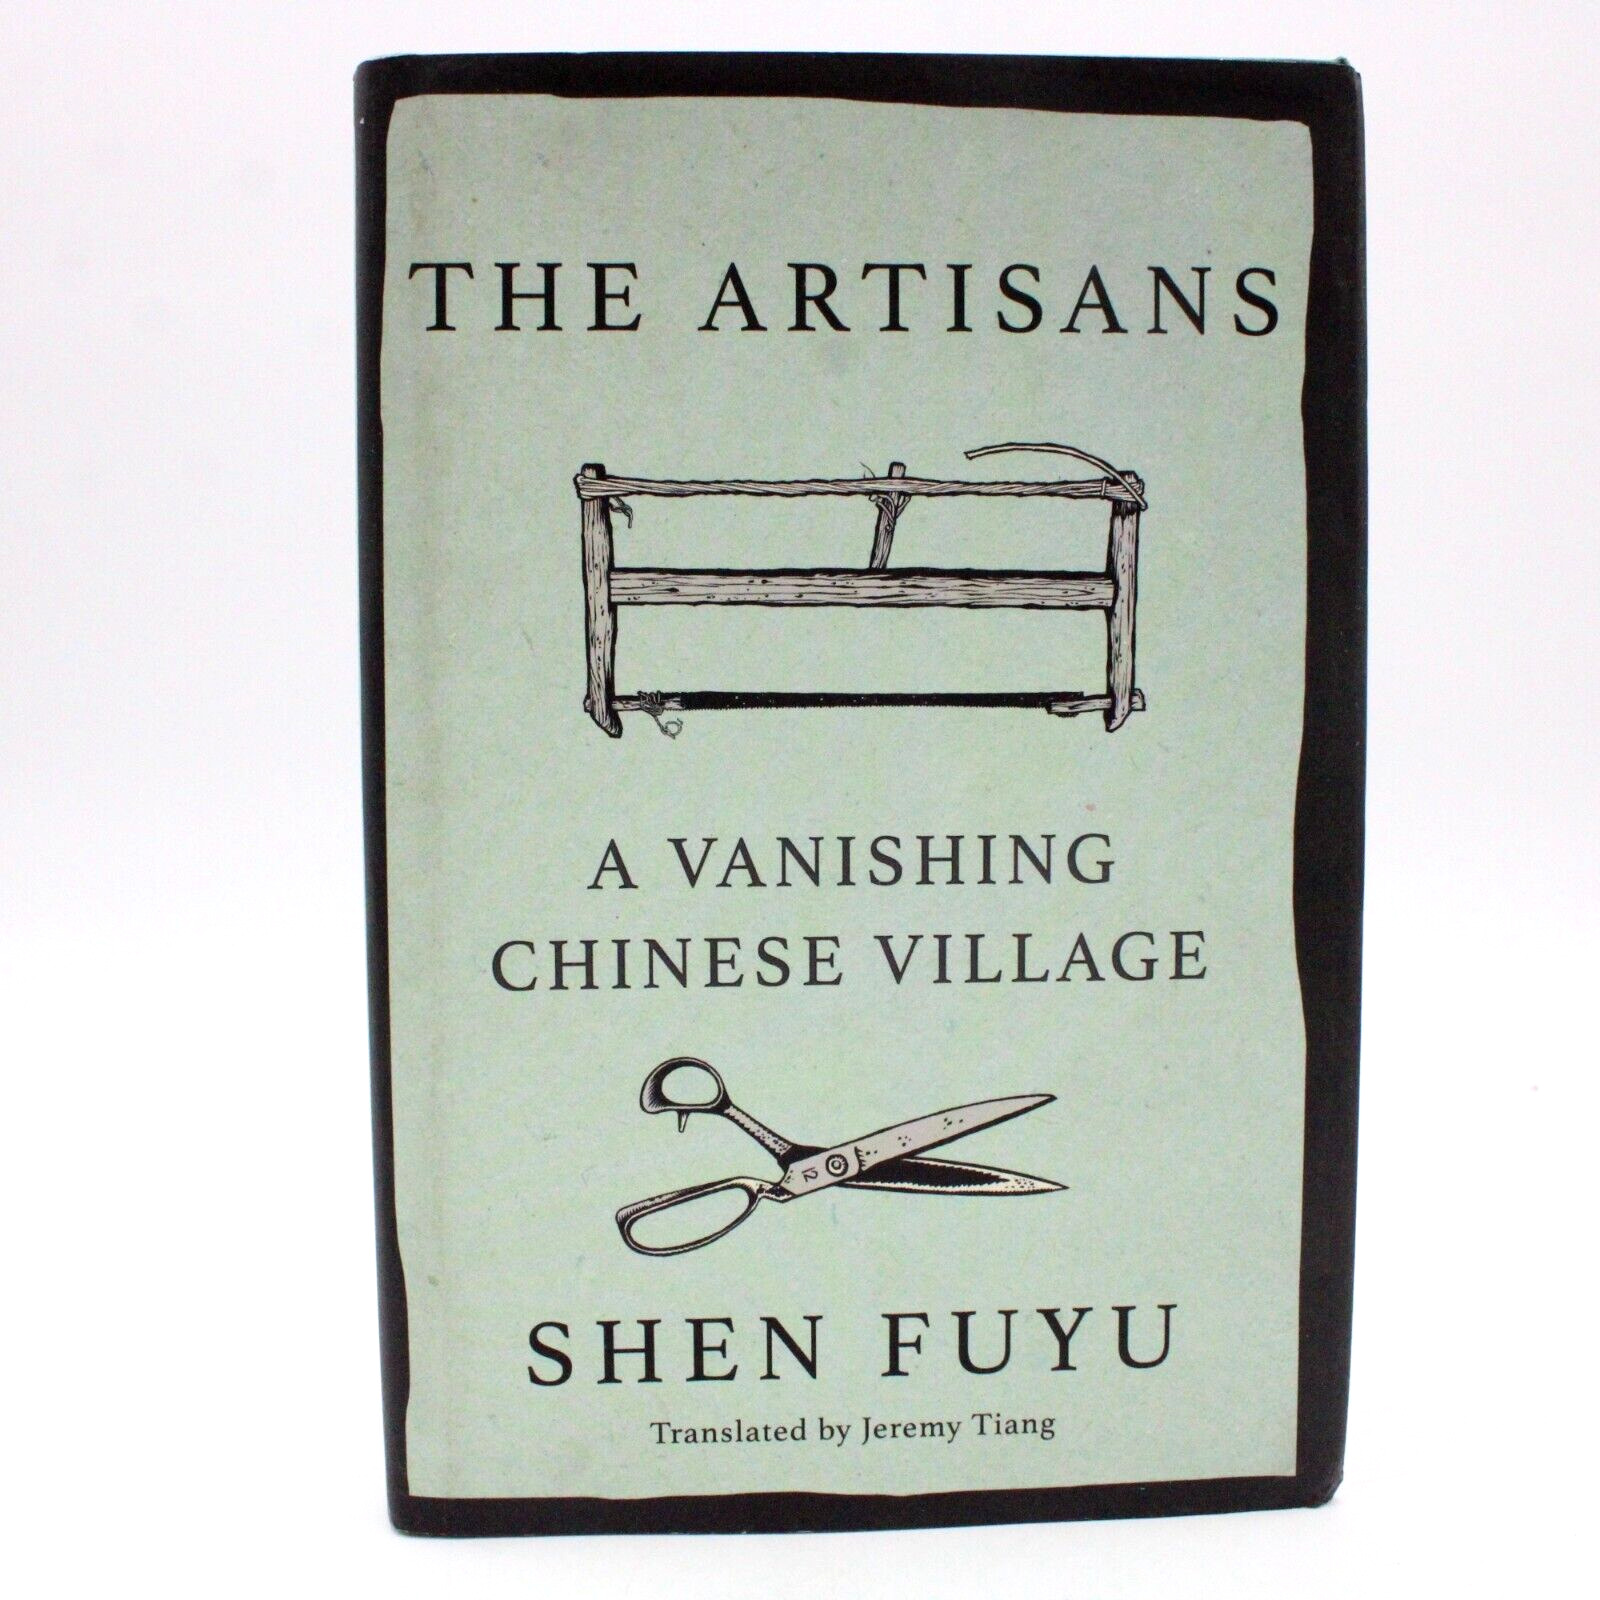 The Artisans: A Vanishing Chinese Village - Hardcover Book By Shen Fuyu